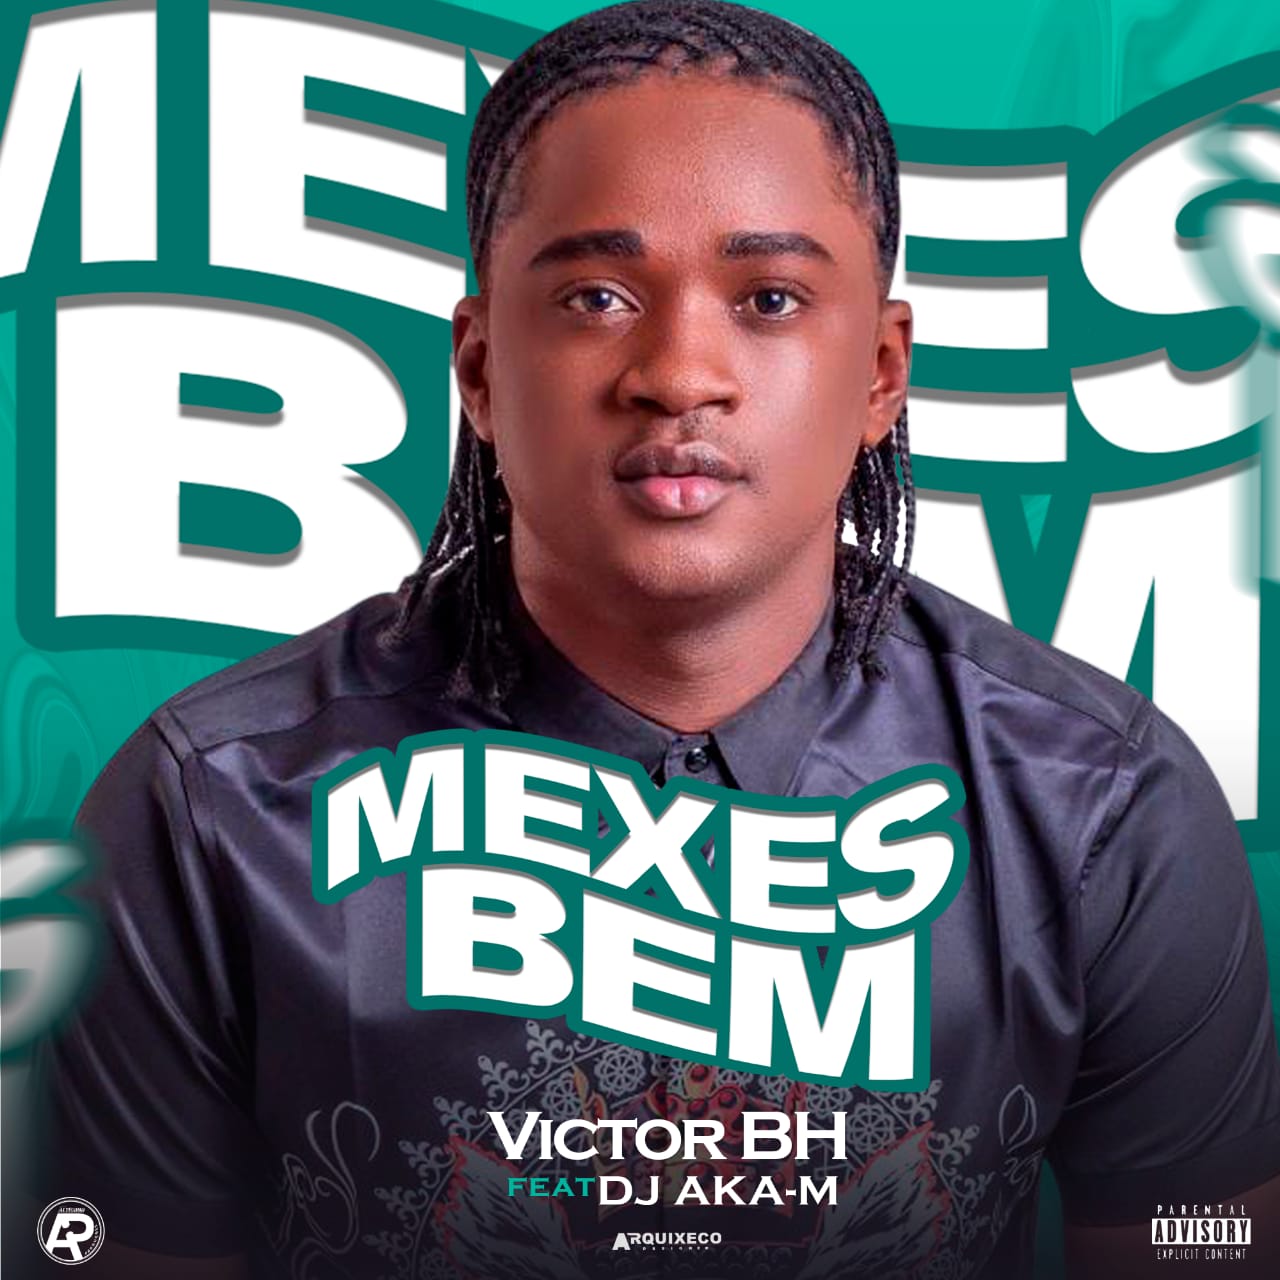 Victor BH - Mexes Bem (Afro House) 2022